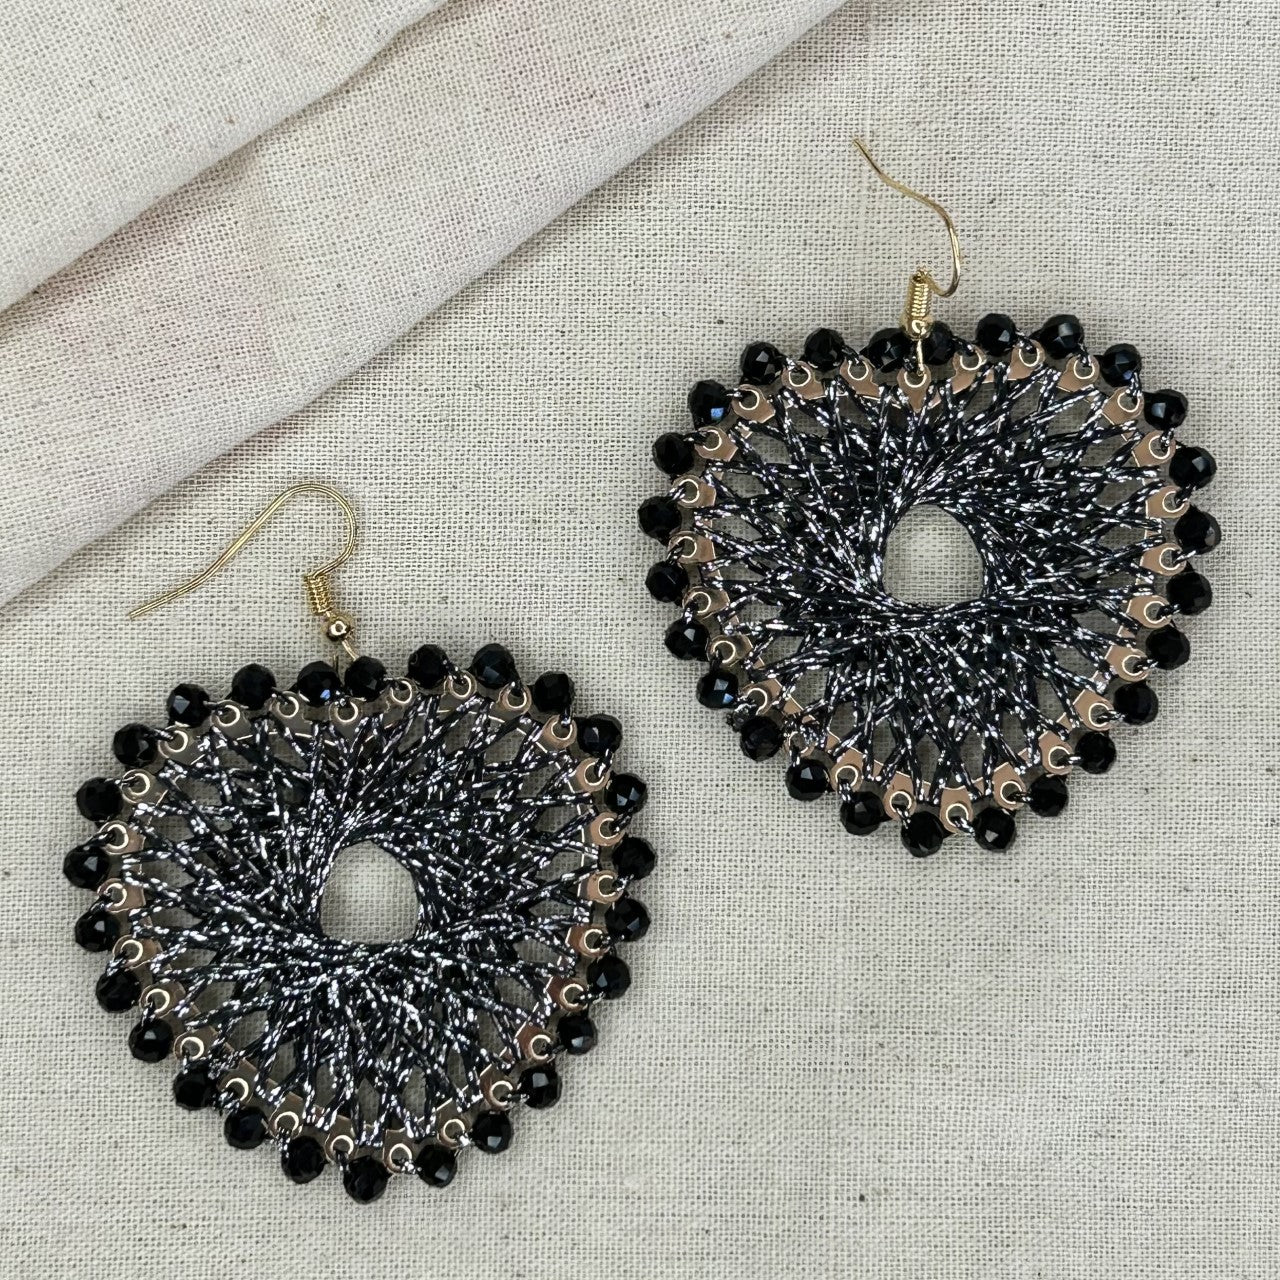 Angelco Accessories Colour burst heart earrings on linen background - black silver